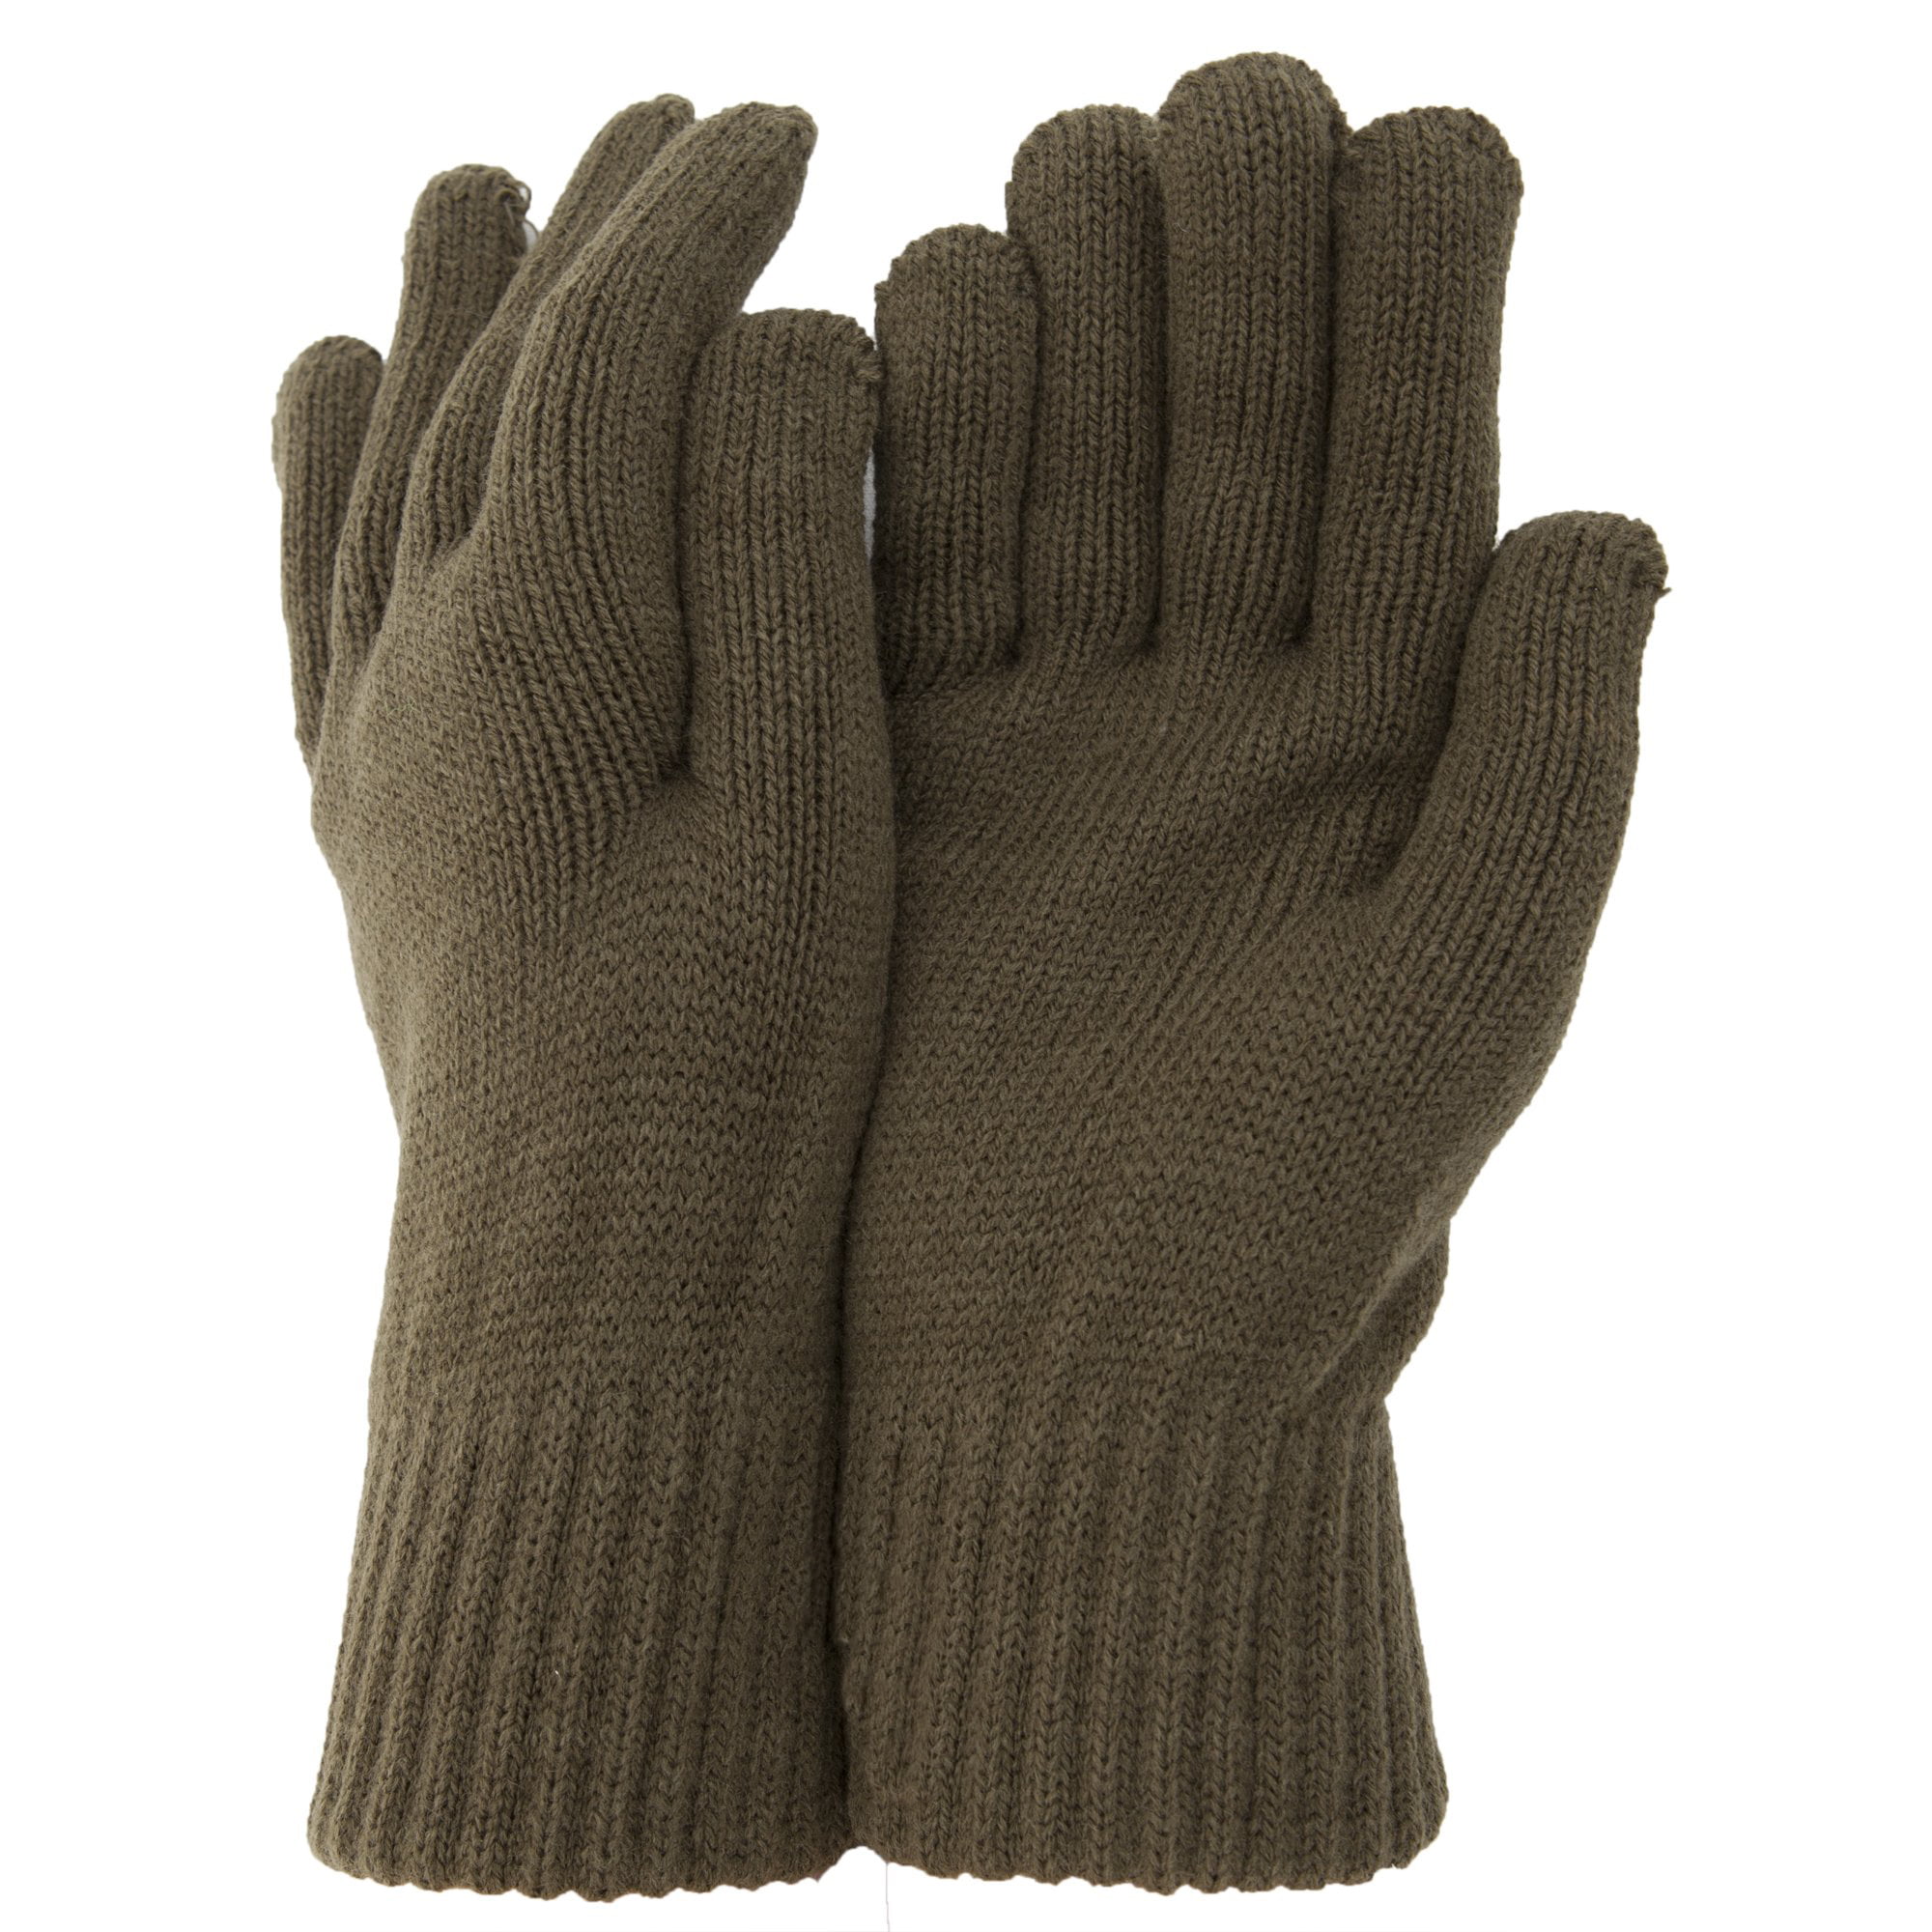 CLEARANCE Mens Thermal Knitted Winter Gloves Walmart Canada